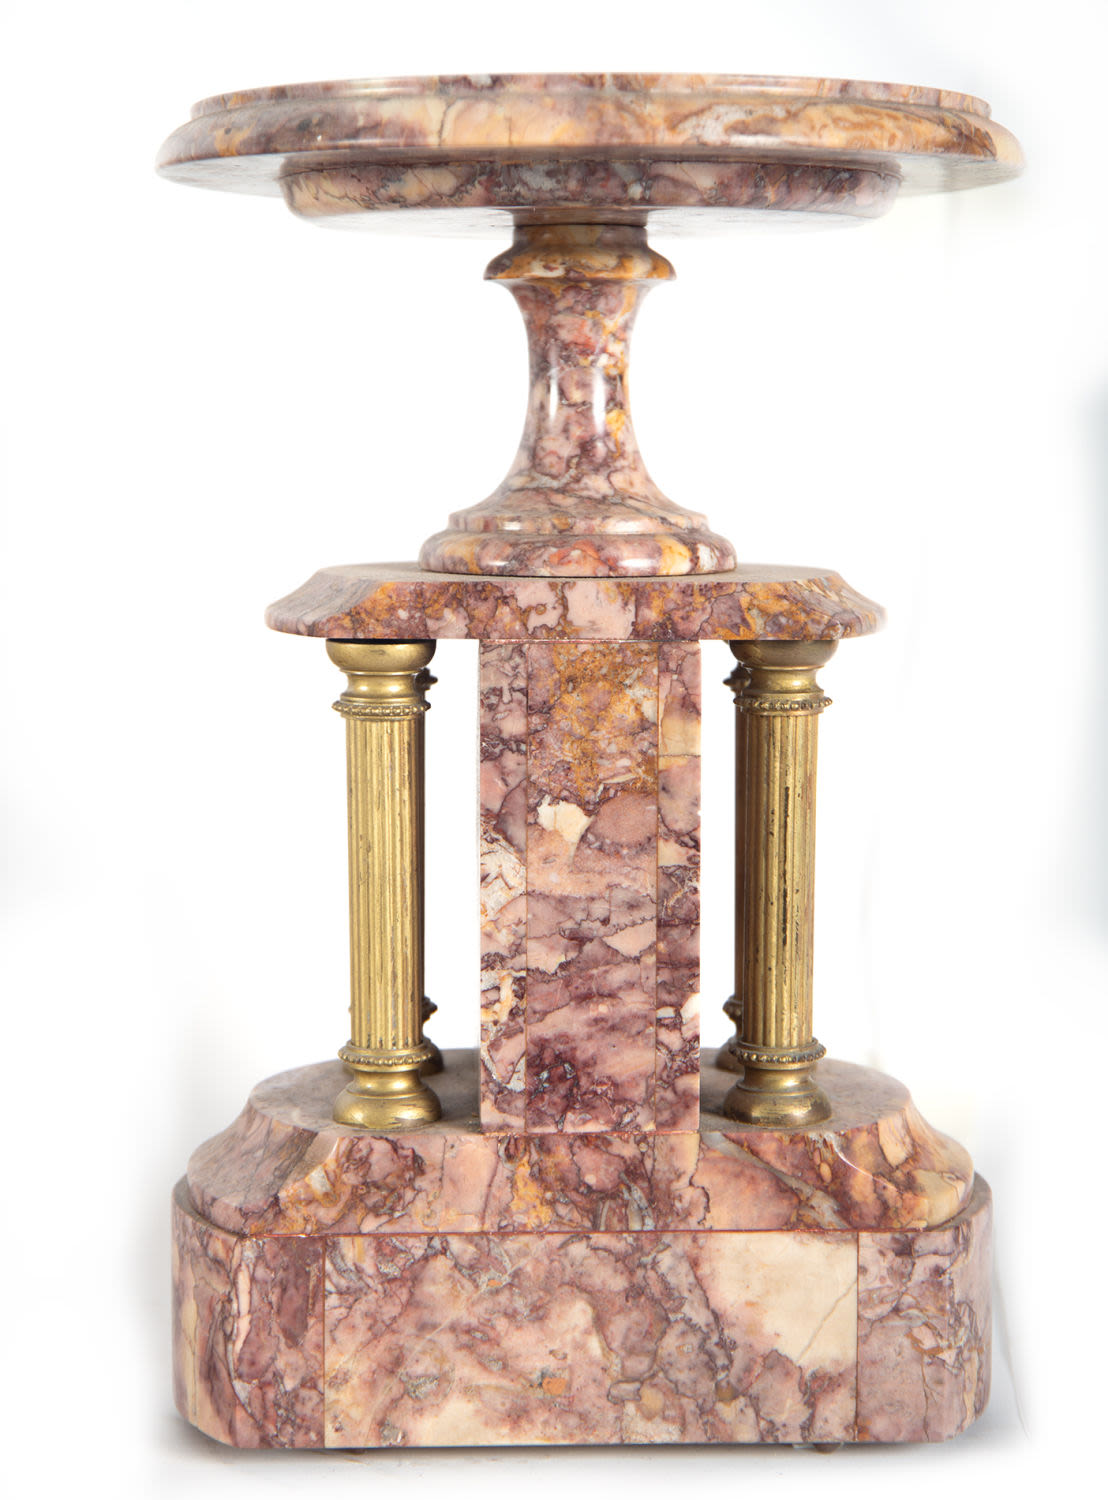 garniture in pink marble and gilt bronze, with mercury pendulum - Image 9 of 13